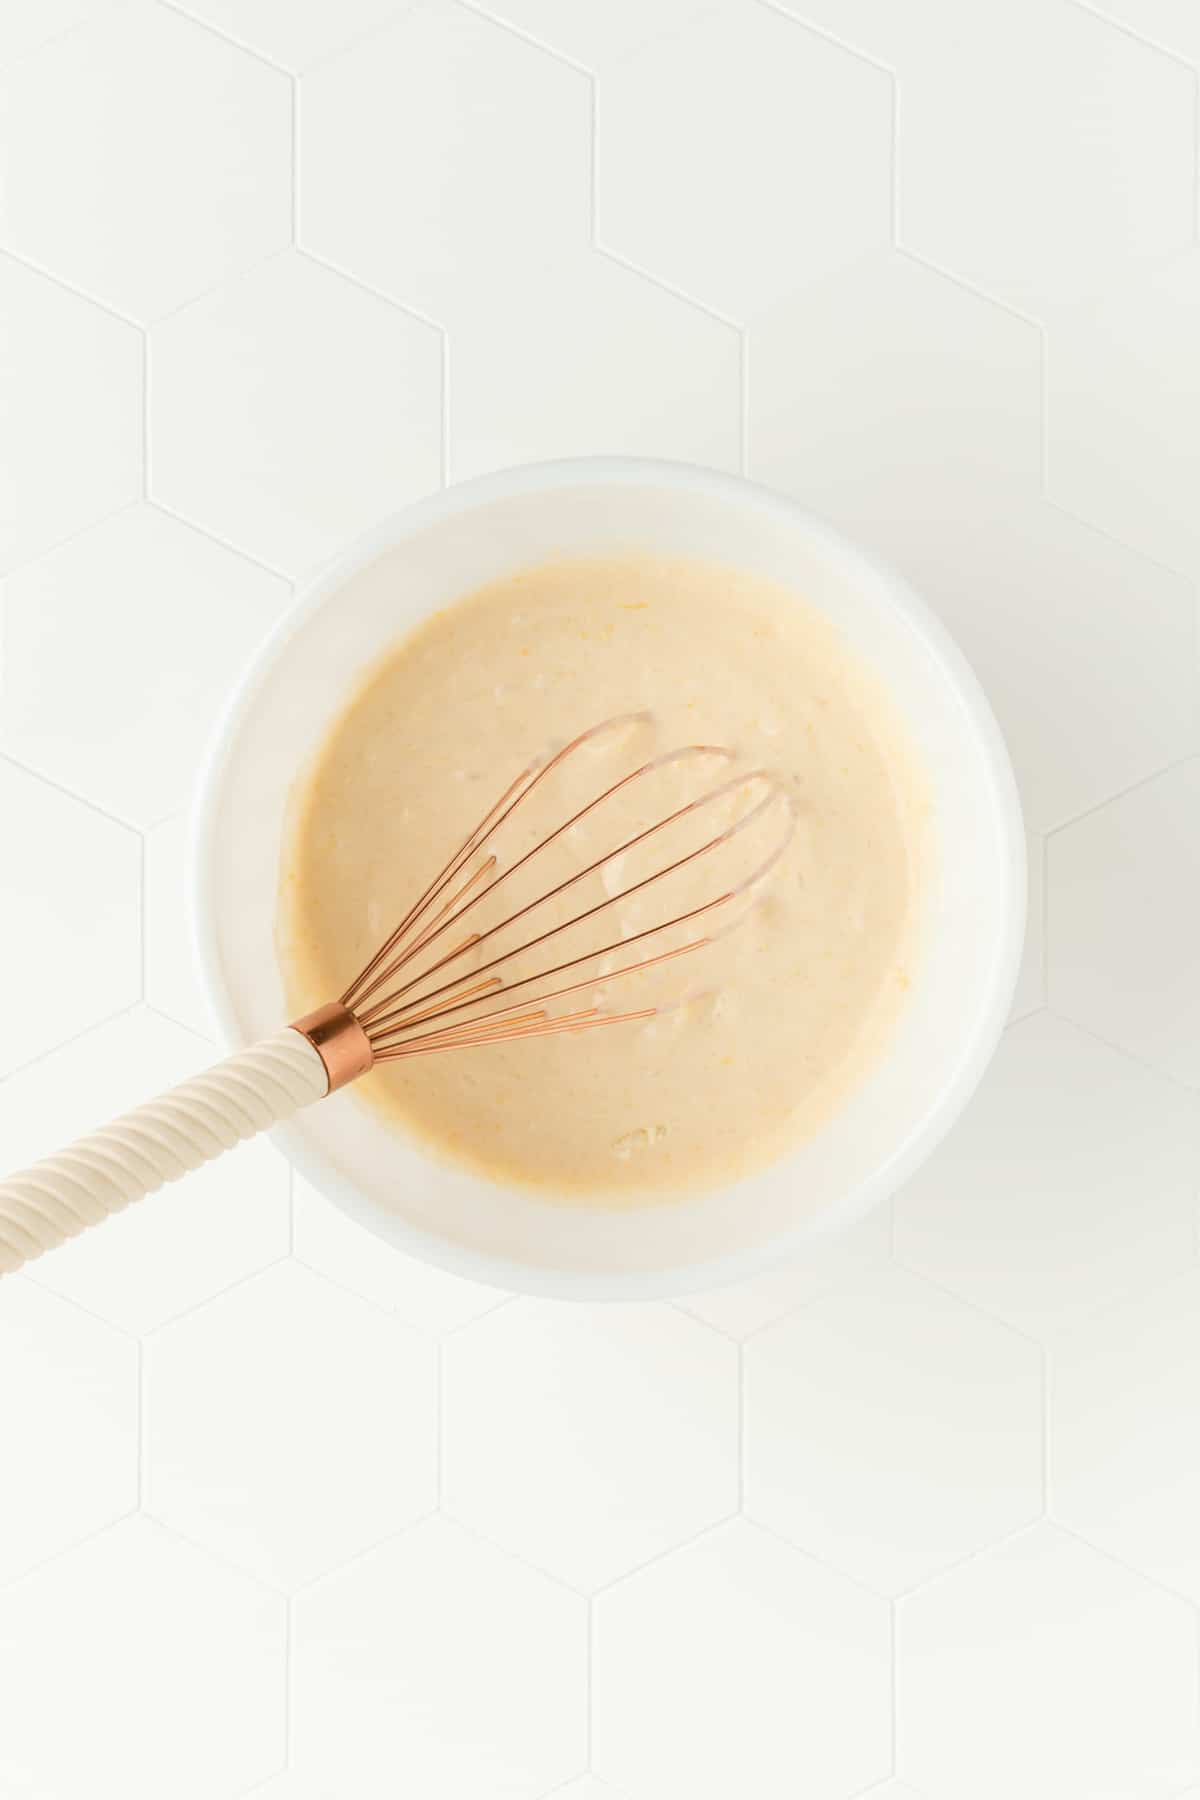 Lemon pancake batter in white mixing bowl with copper and Ivory whisk.